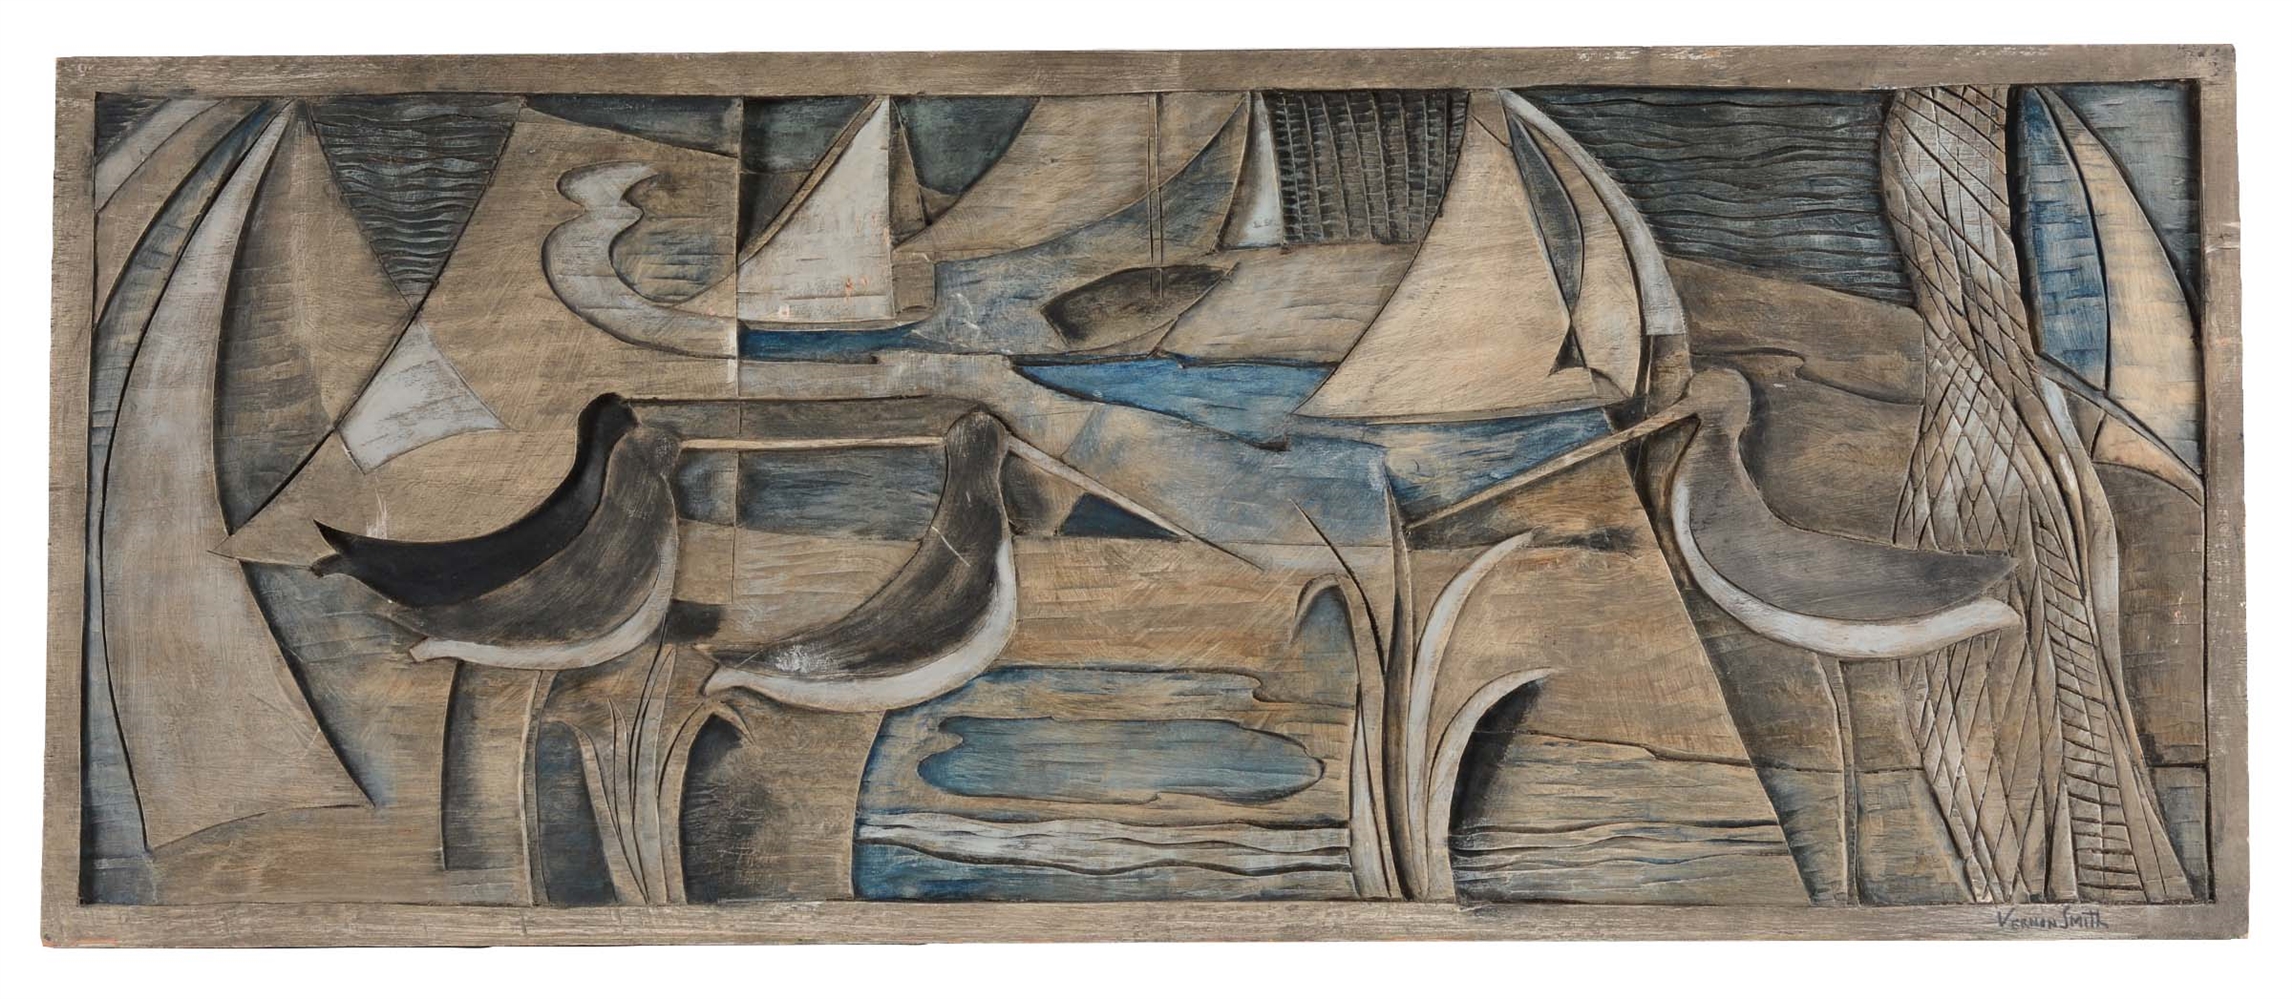 VERNON B. SMITH (AMERICAN, 1894 - 1969) SANDPIPERS AND SAILBOATS RELIEF PLAQUE. 